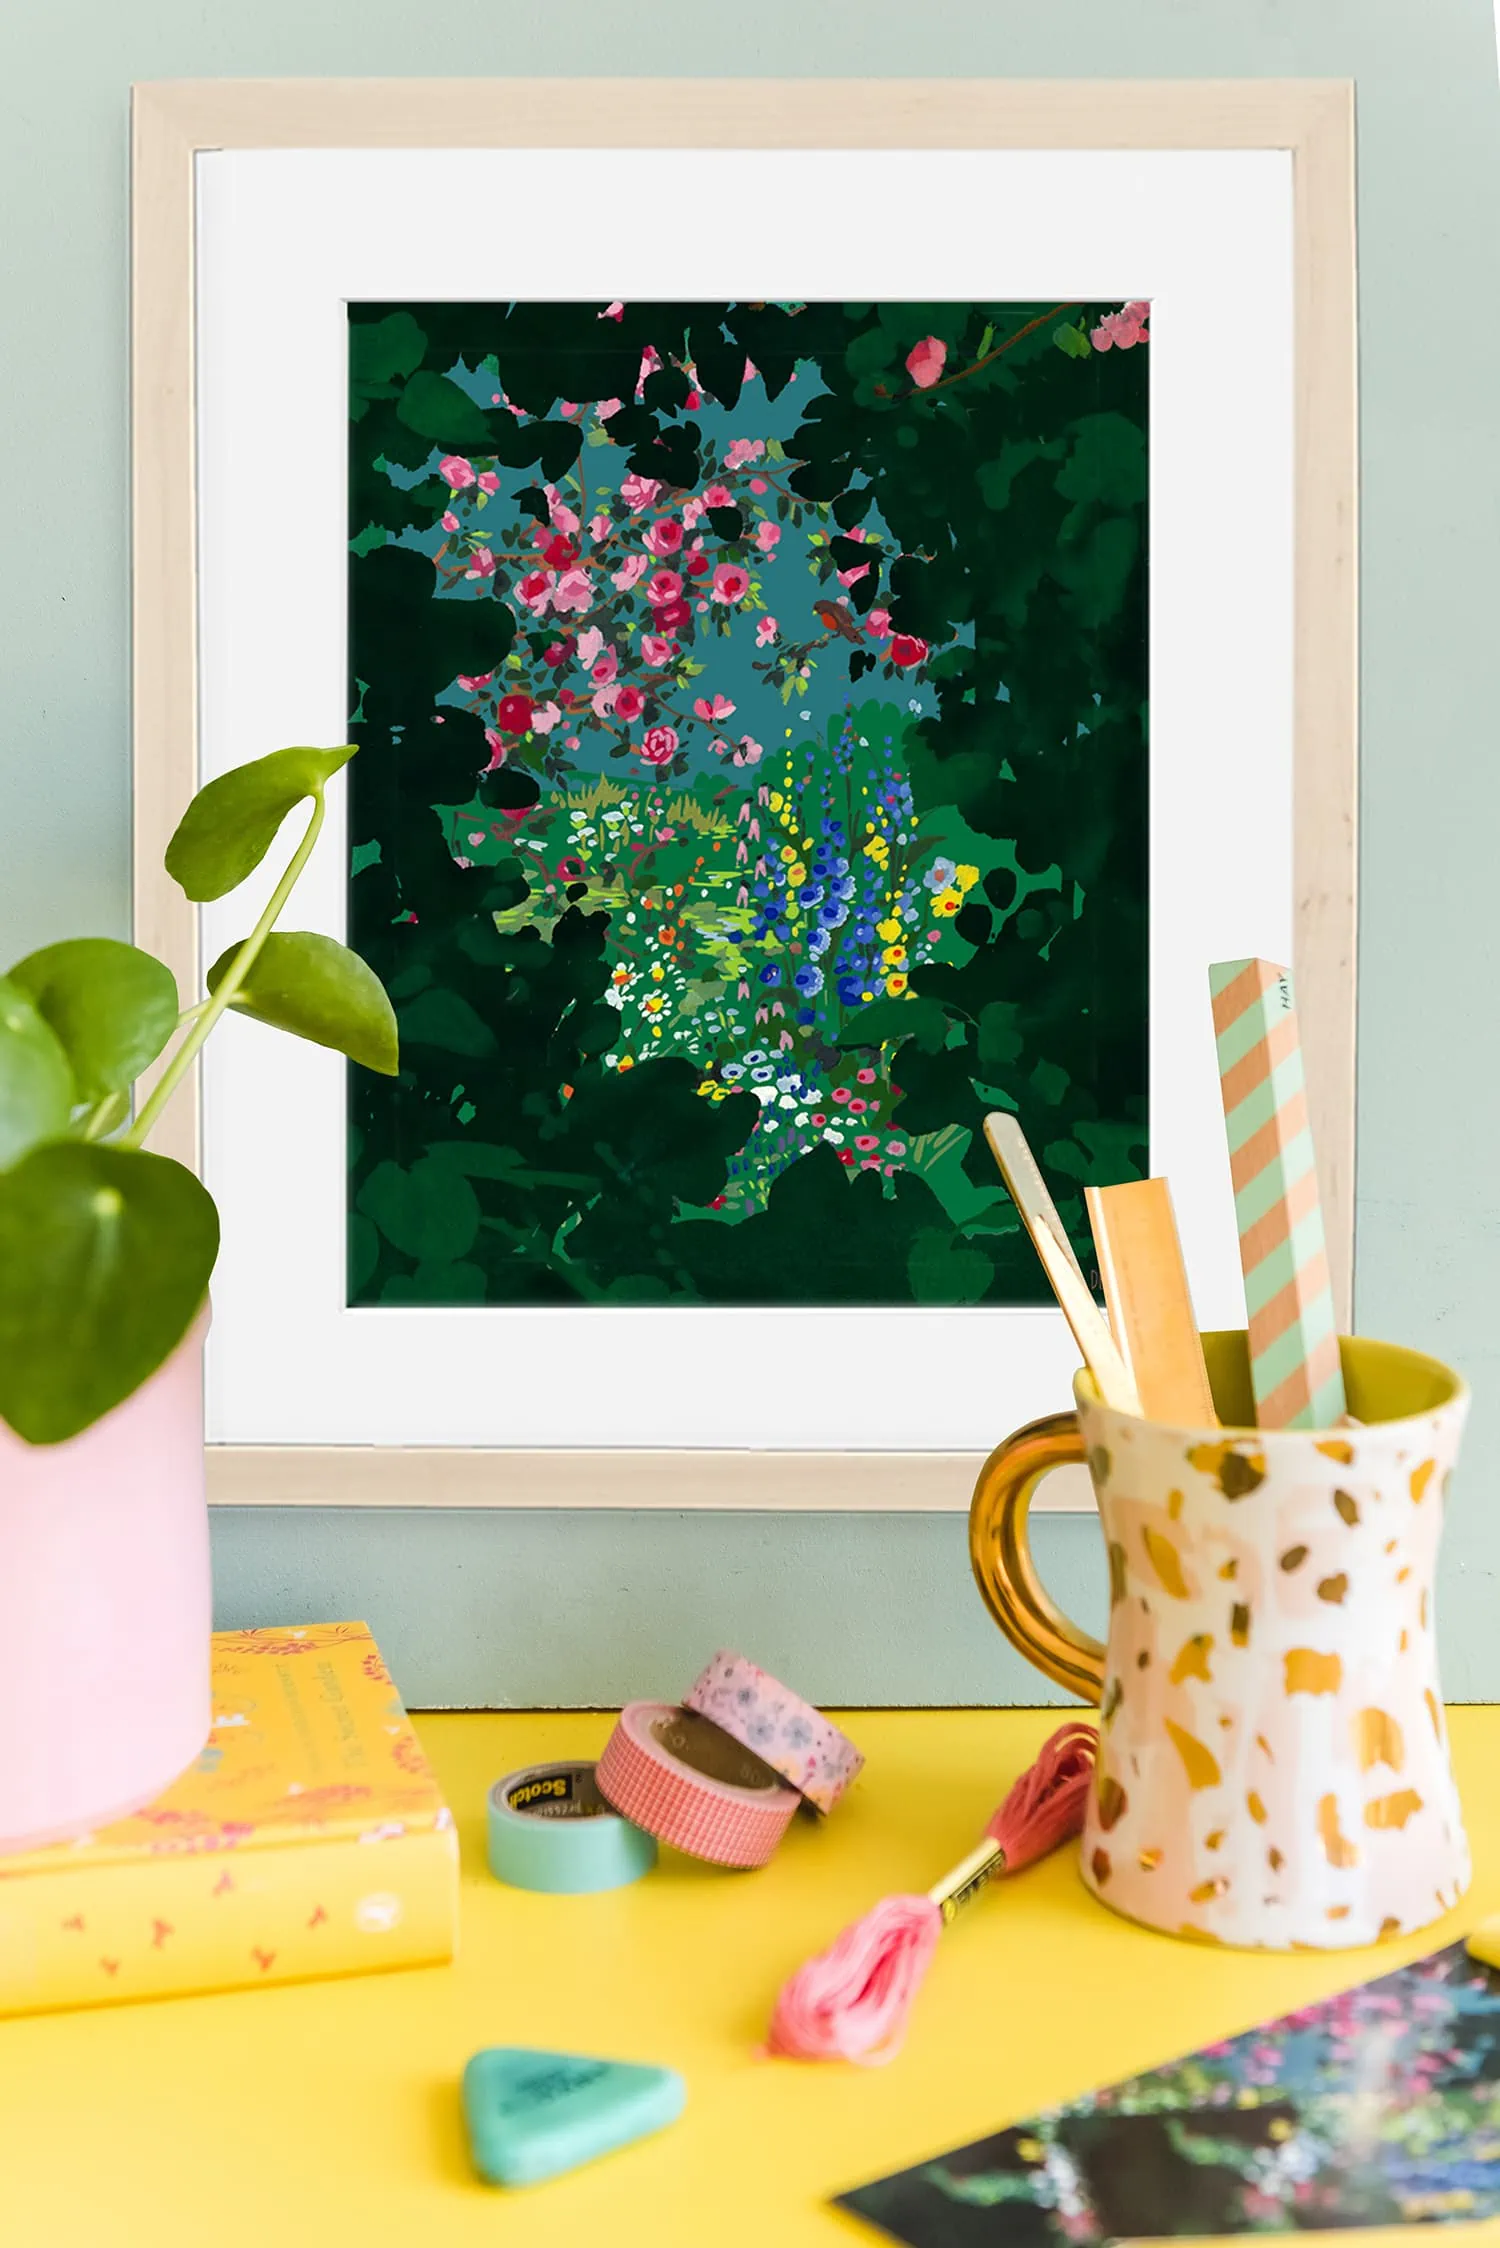 A print of flowers in a green secret garden tunnel hangs on the wall in front of a plant and some craft supplies